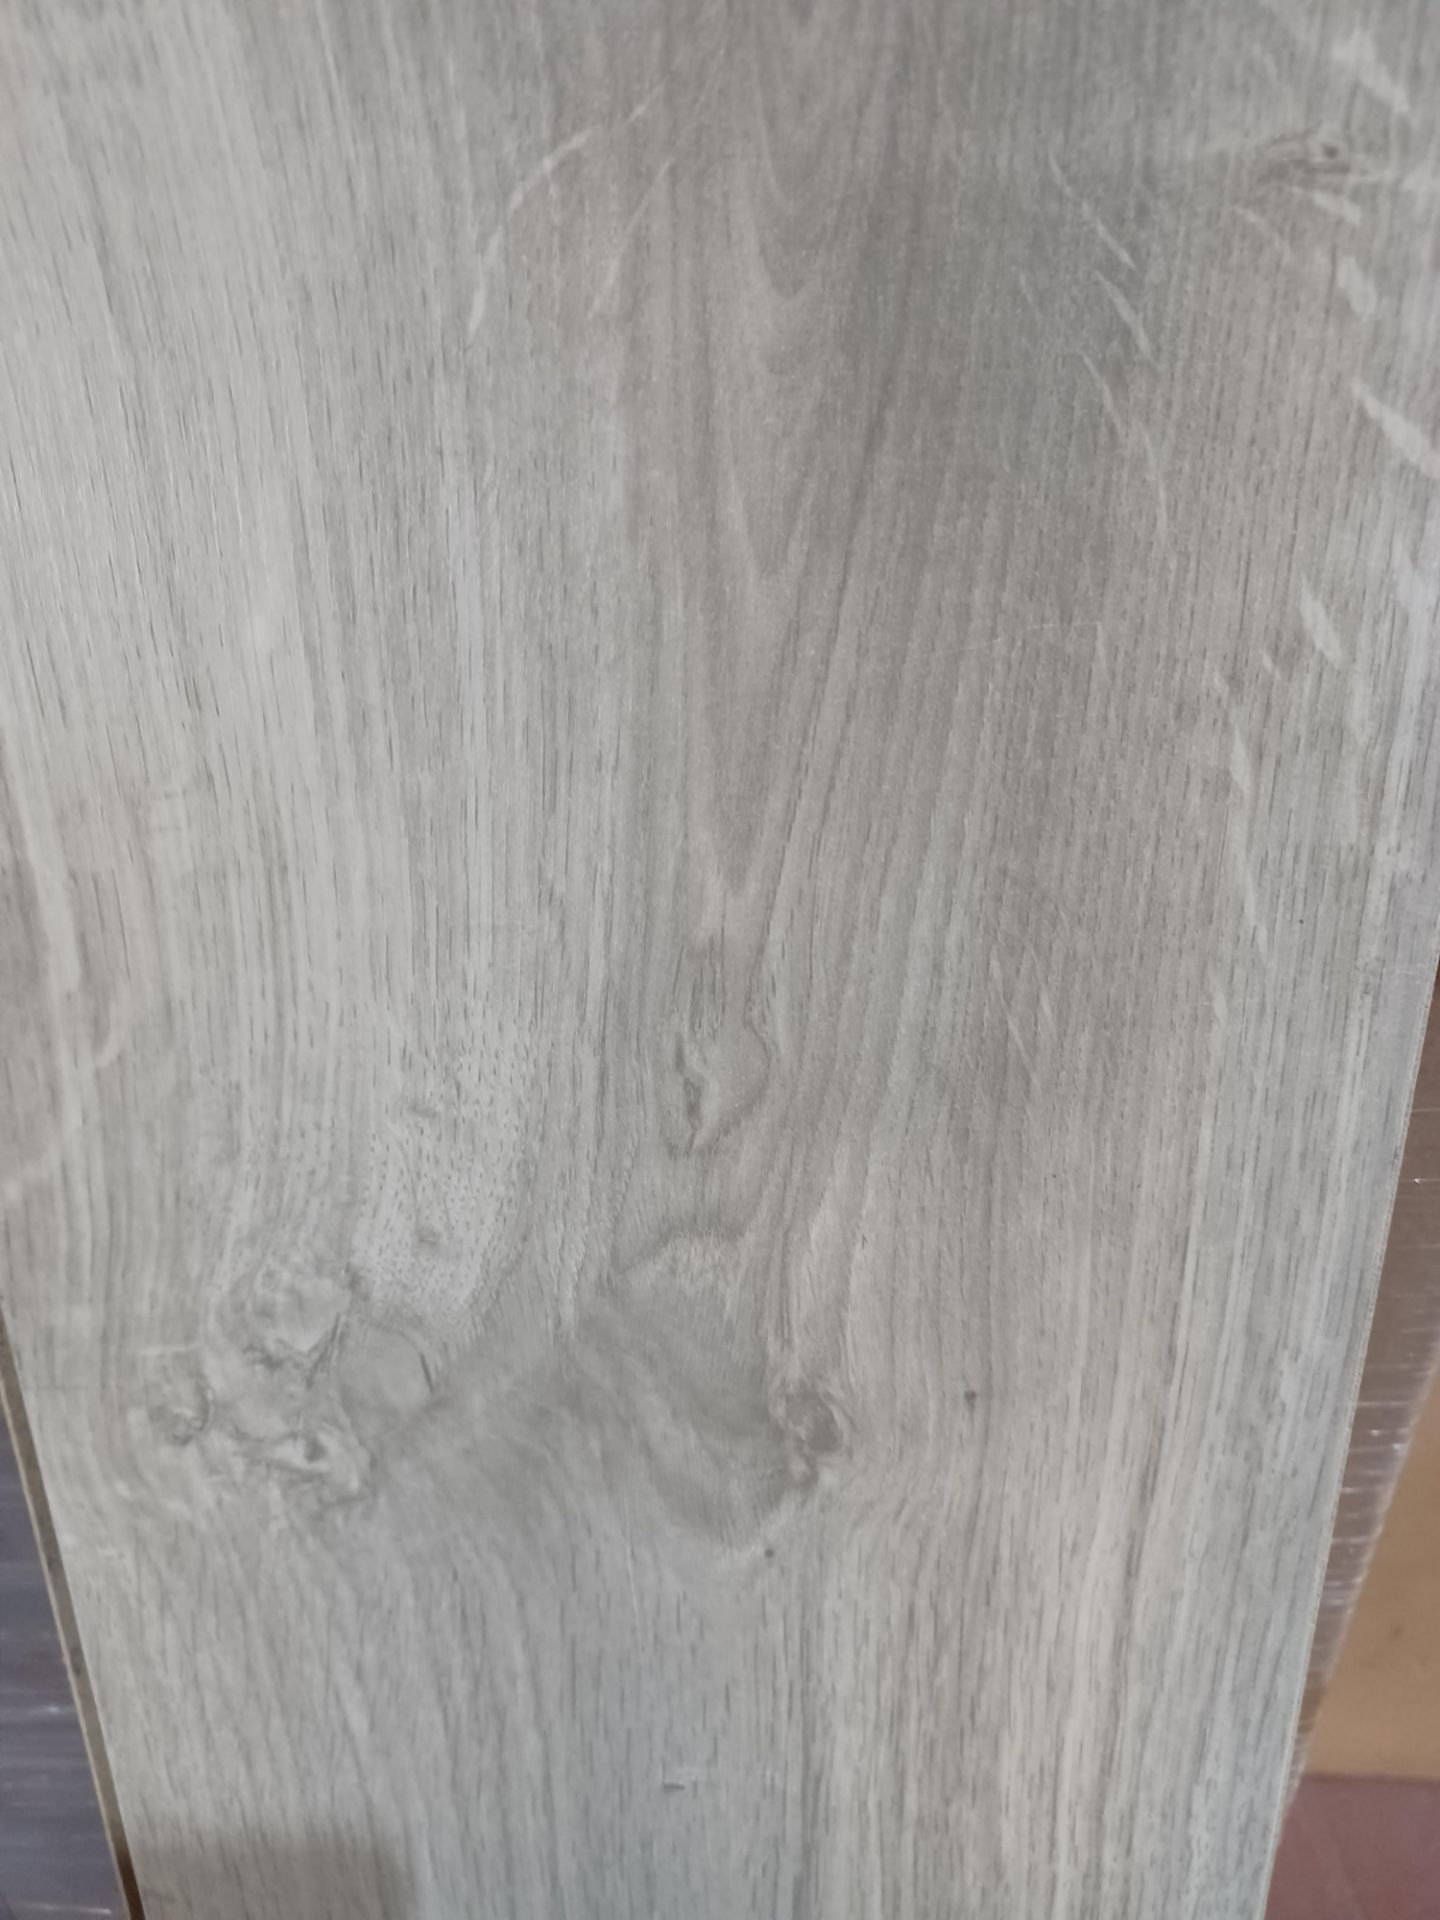 PALLET TO CONTAIN 12 X PACKS OF YASUR LAMINATE FLOORING. FINISH: STRUCTURED. EACH PACK CONTAINS 1. - Image 2 of 2